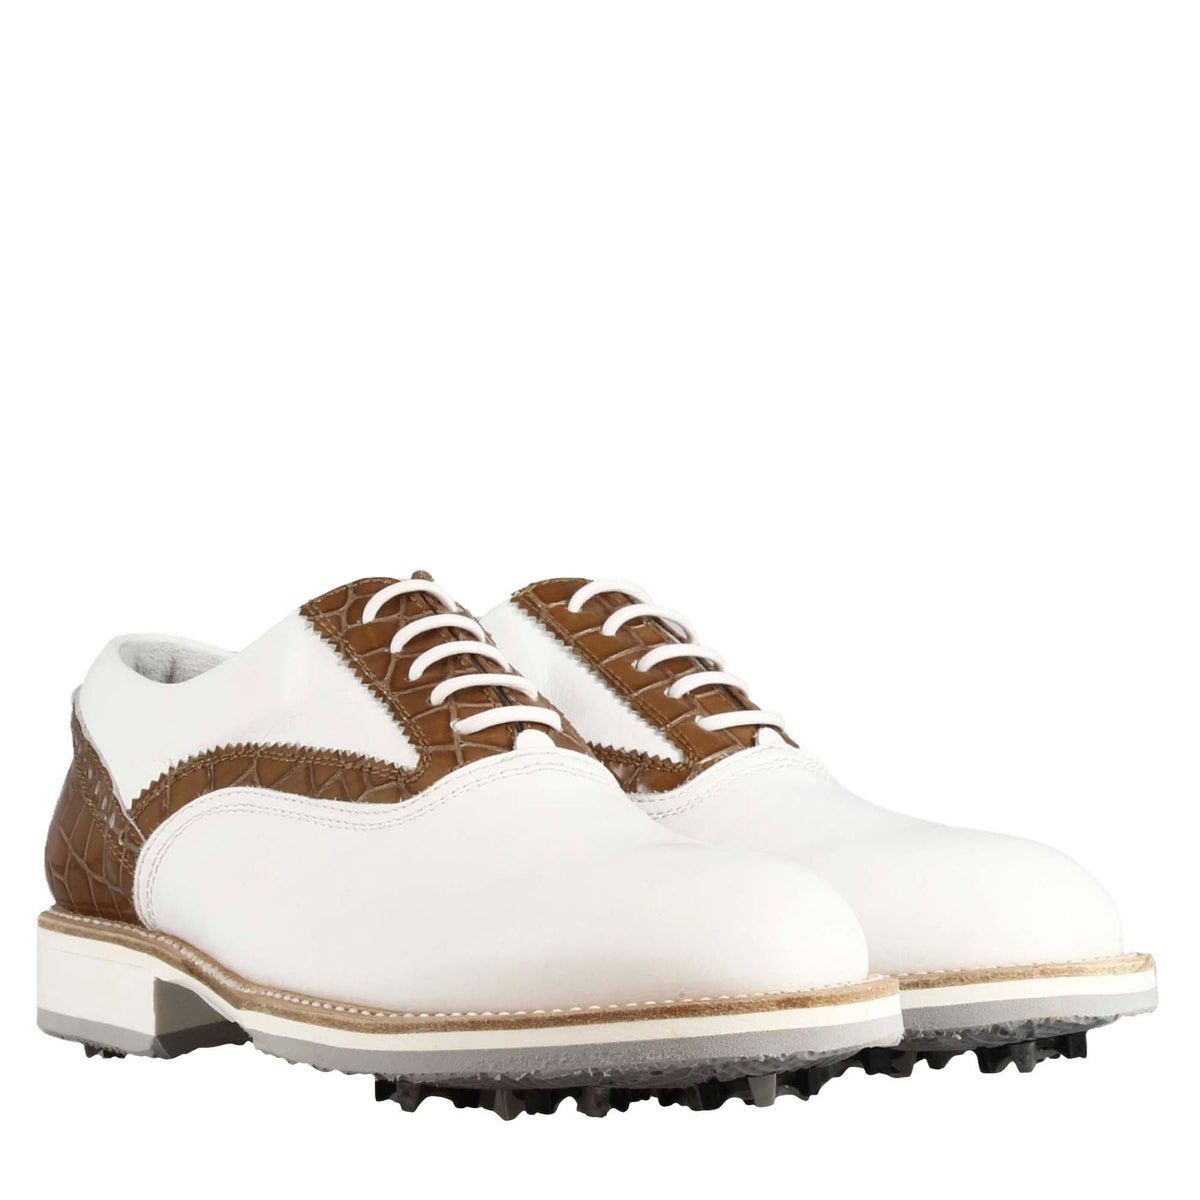 Handcrafted women's golf shoes in white leather with light brown details